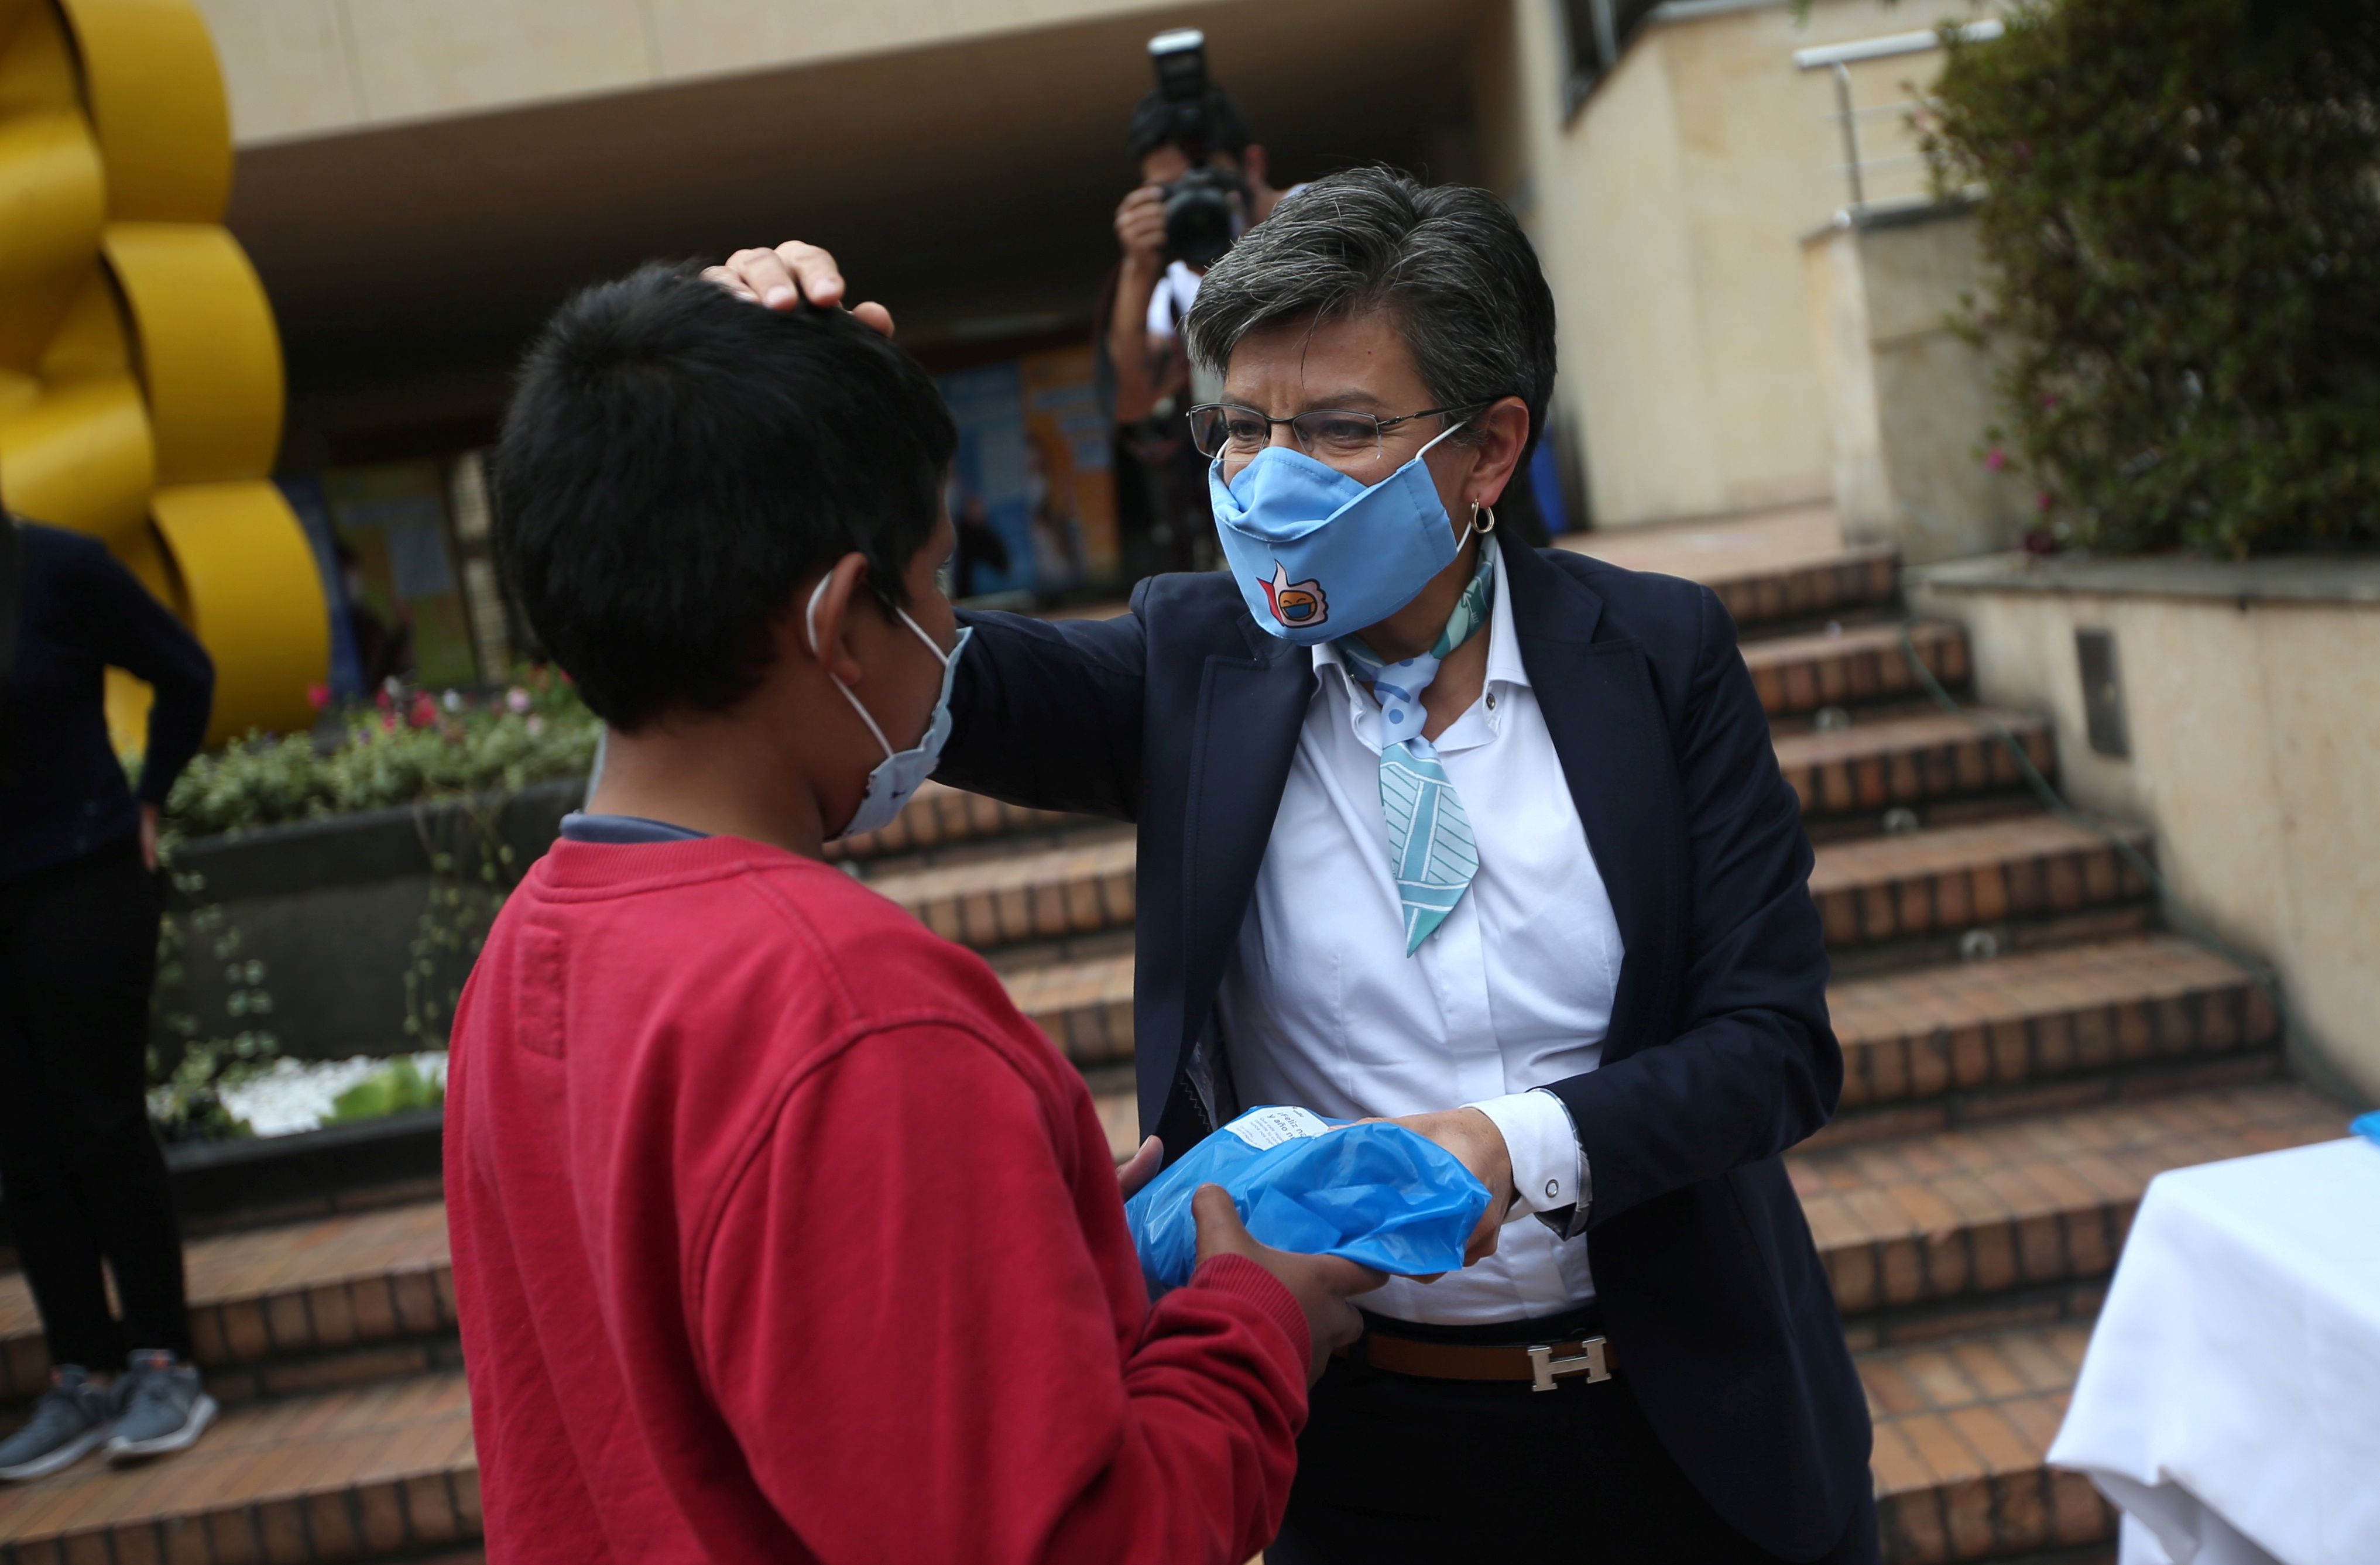 The mayor of Bogota Claudia Lopez wearing a face mask gives a gift to a Venezuelan migrant child during a Christmas event of the Bogota mayor's office, in Bogota, Colombia December 17, 2020. REUTERS/Luisa Gonzalez